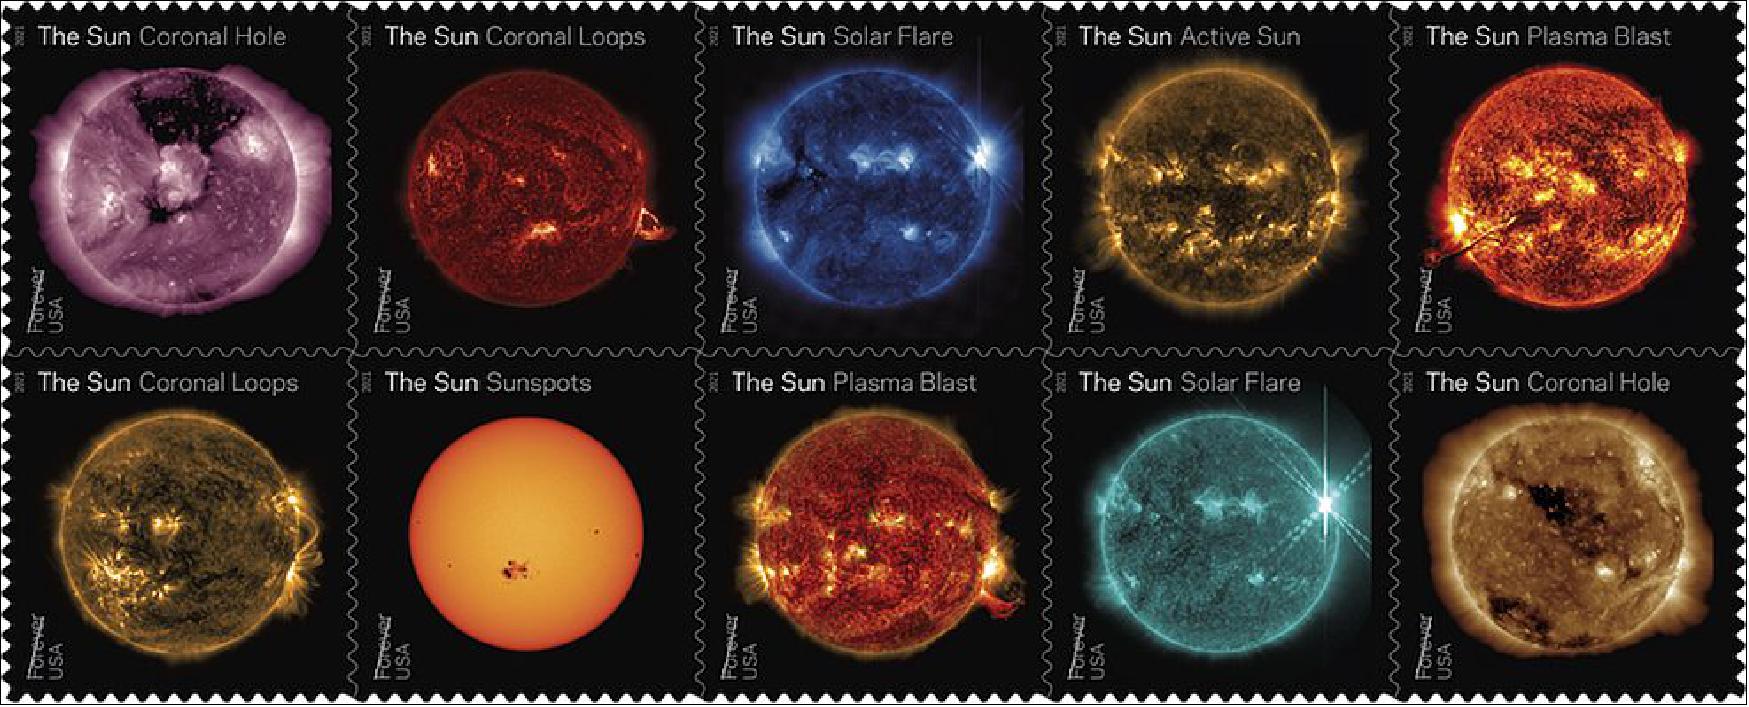 Figure 27: The United States Post office announced on Jan. 15, 2021, that they would be releasing a series of stamps highlighting images of the Sun captured by NASA's Solar Dynamics Observatory (image credits: NASA/SDO/USPS)